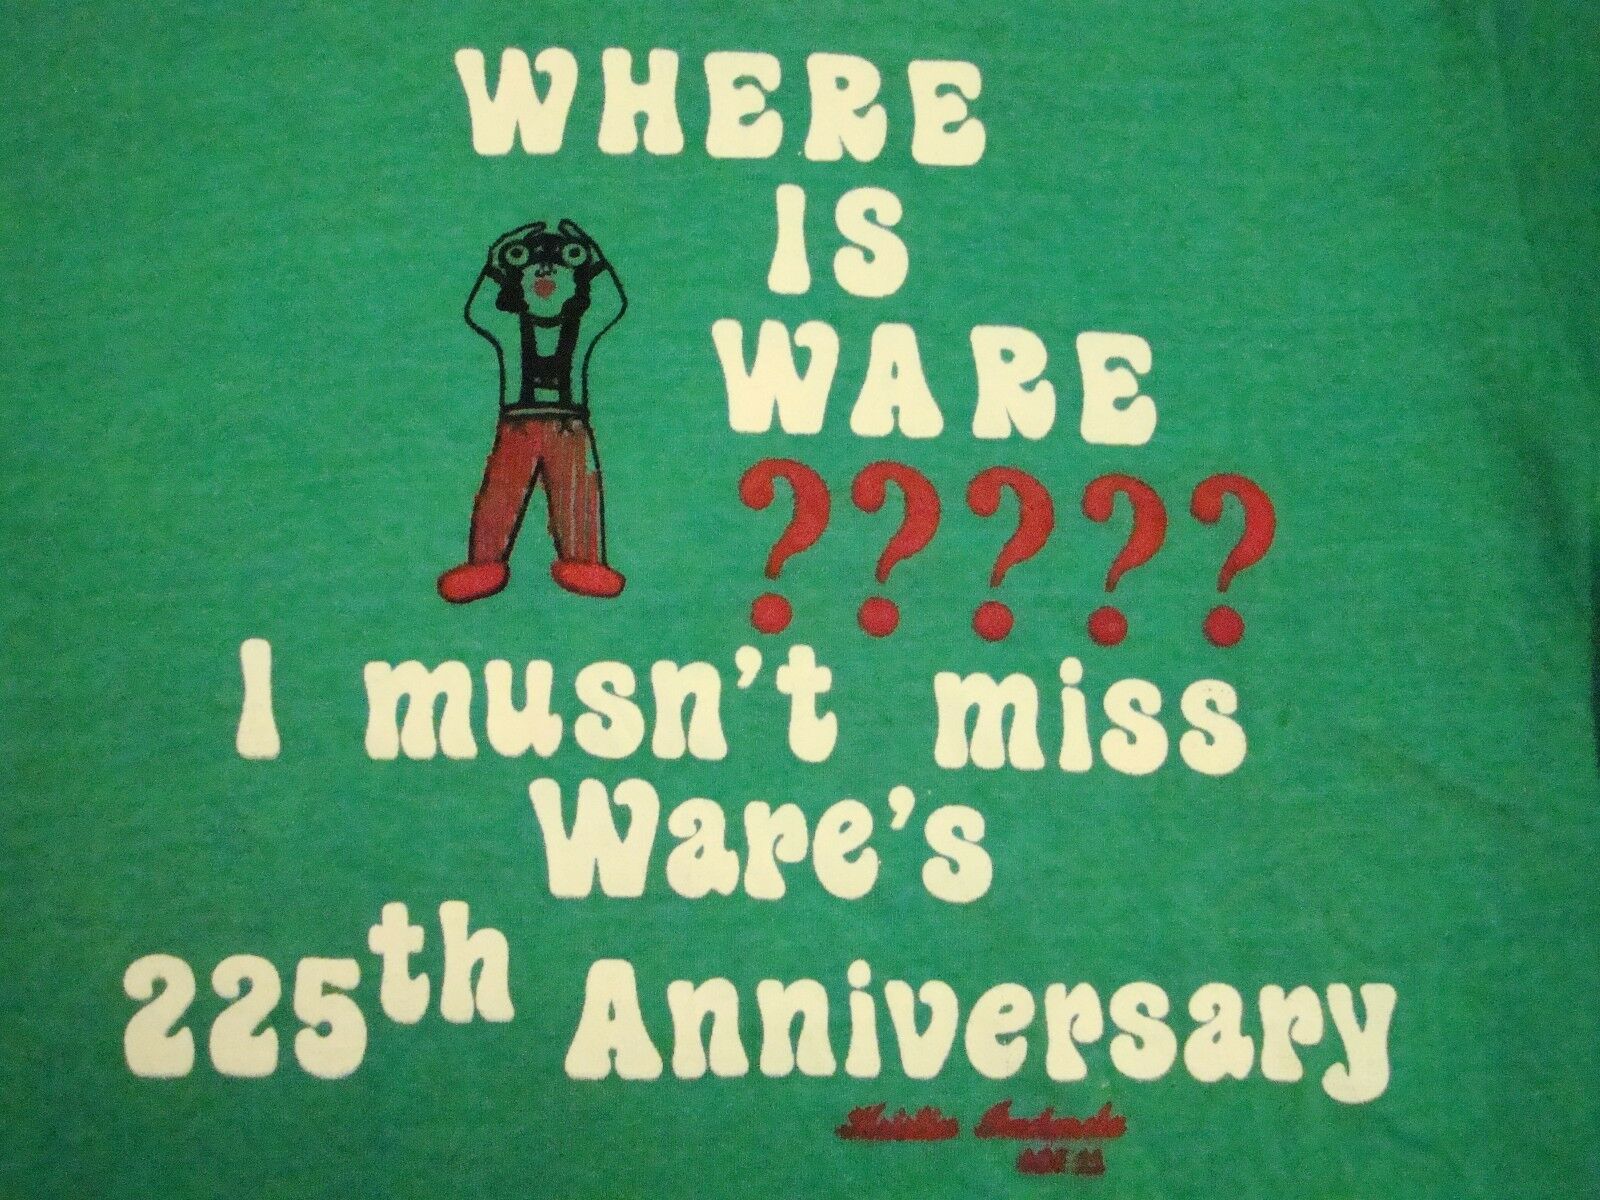 where is ware?